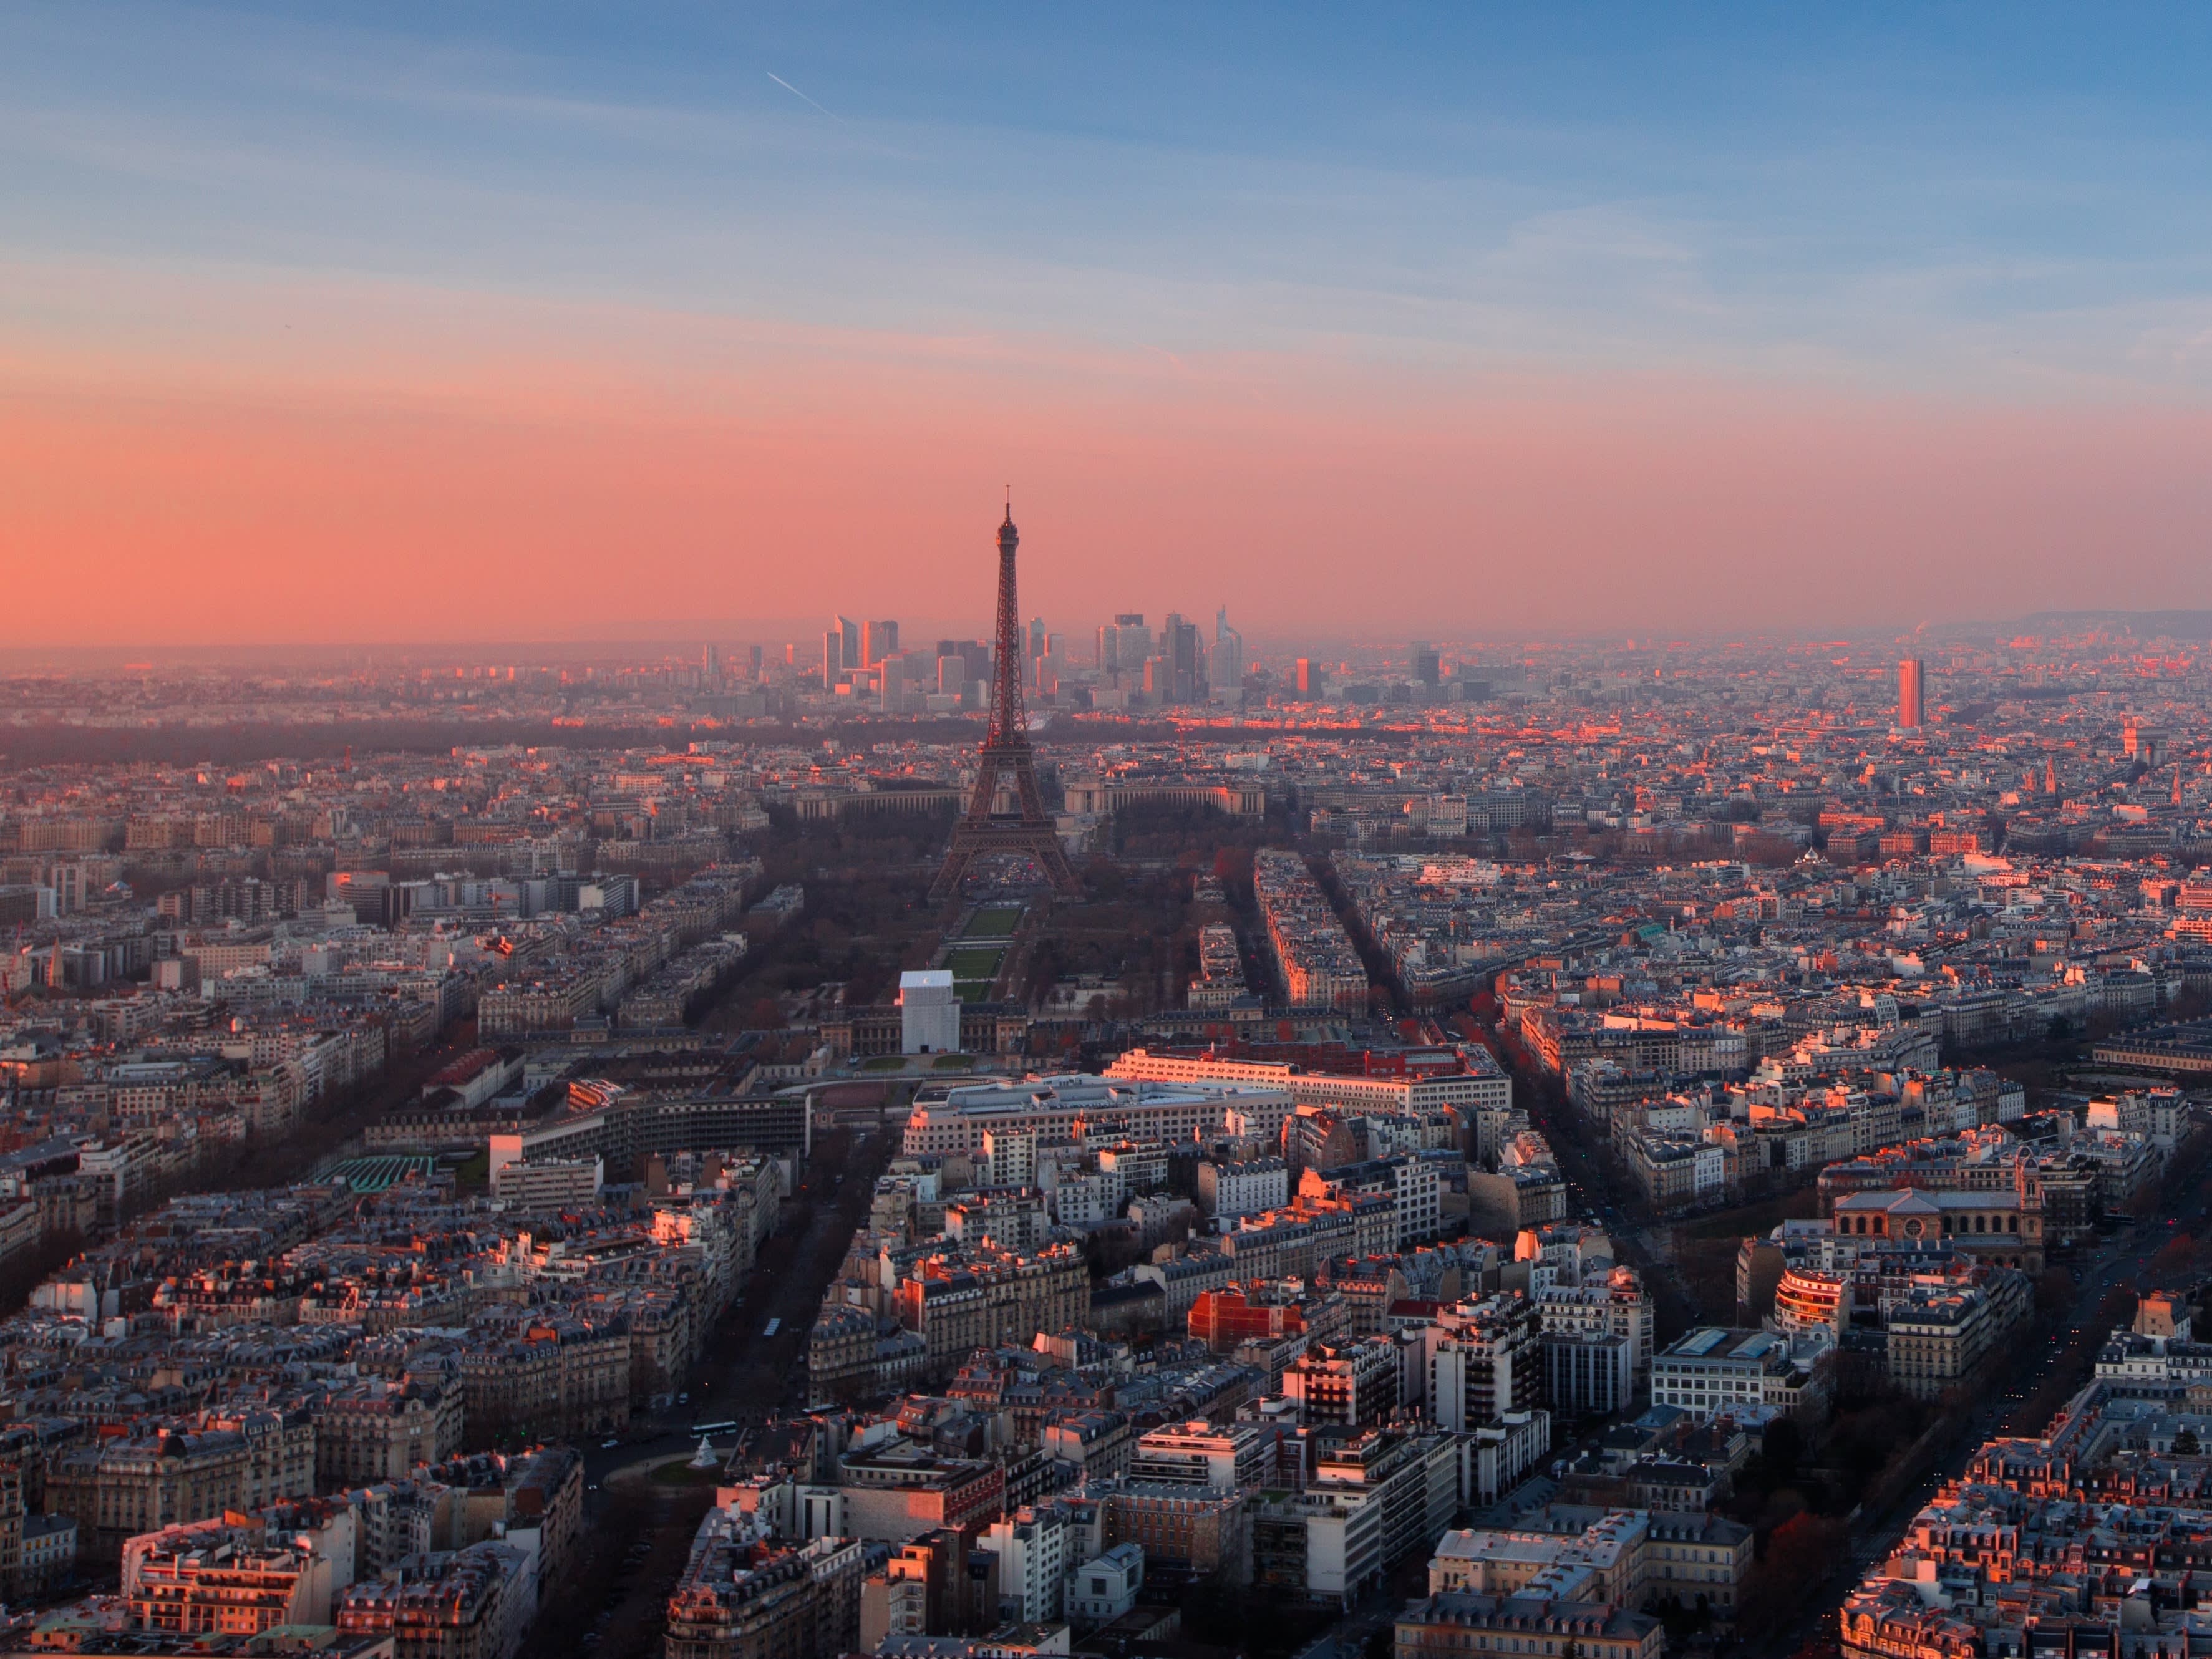 A picture of the skyline of Paris taken from a birds-eye view at sunset